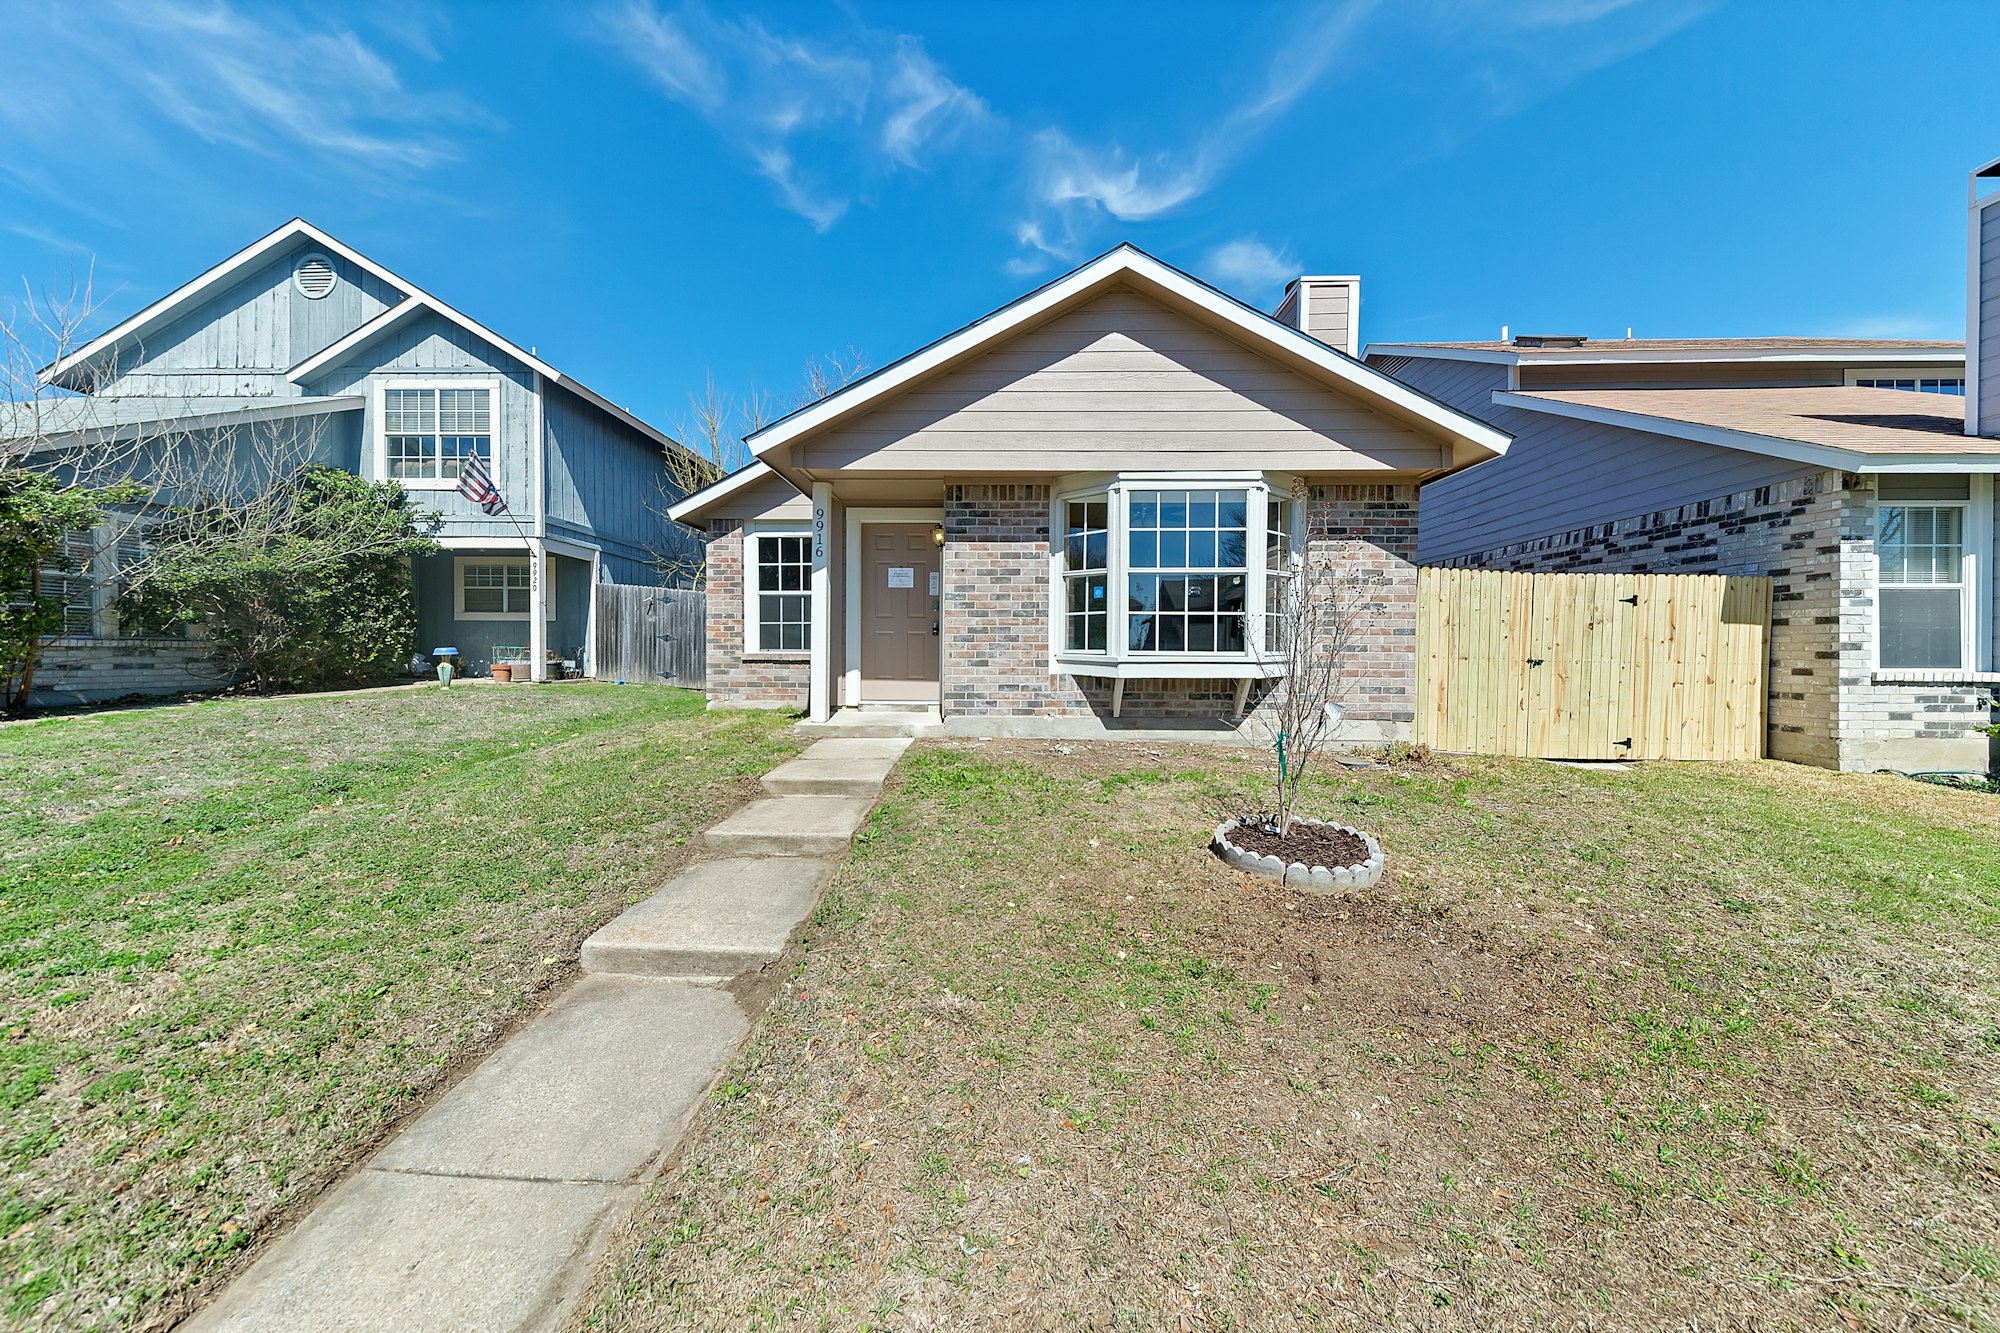 Photo 1 of 24 - 9916 Lone Eagle Dr, Fort Worth, TX 76108